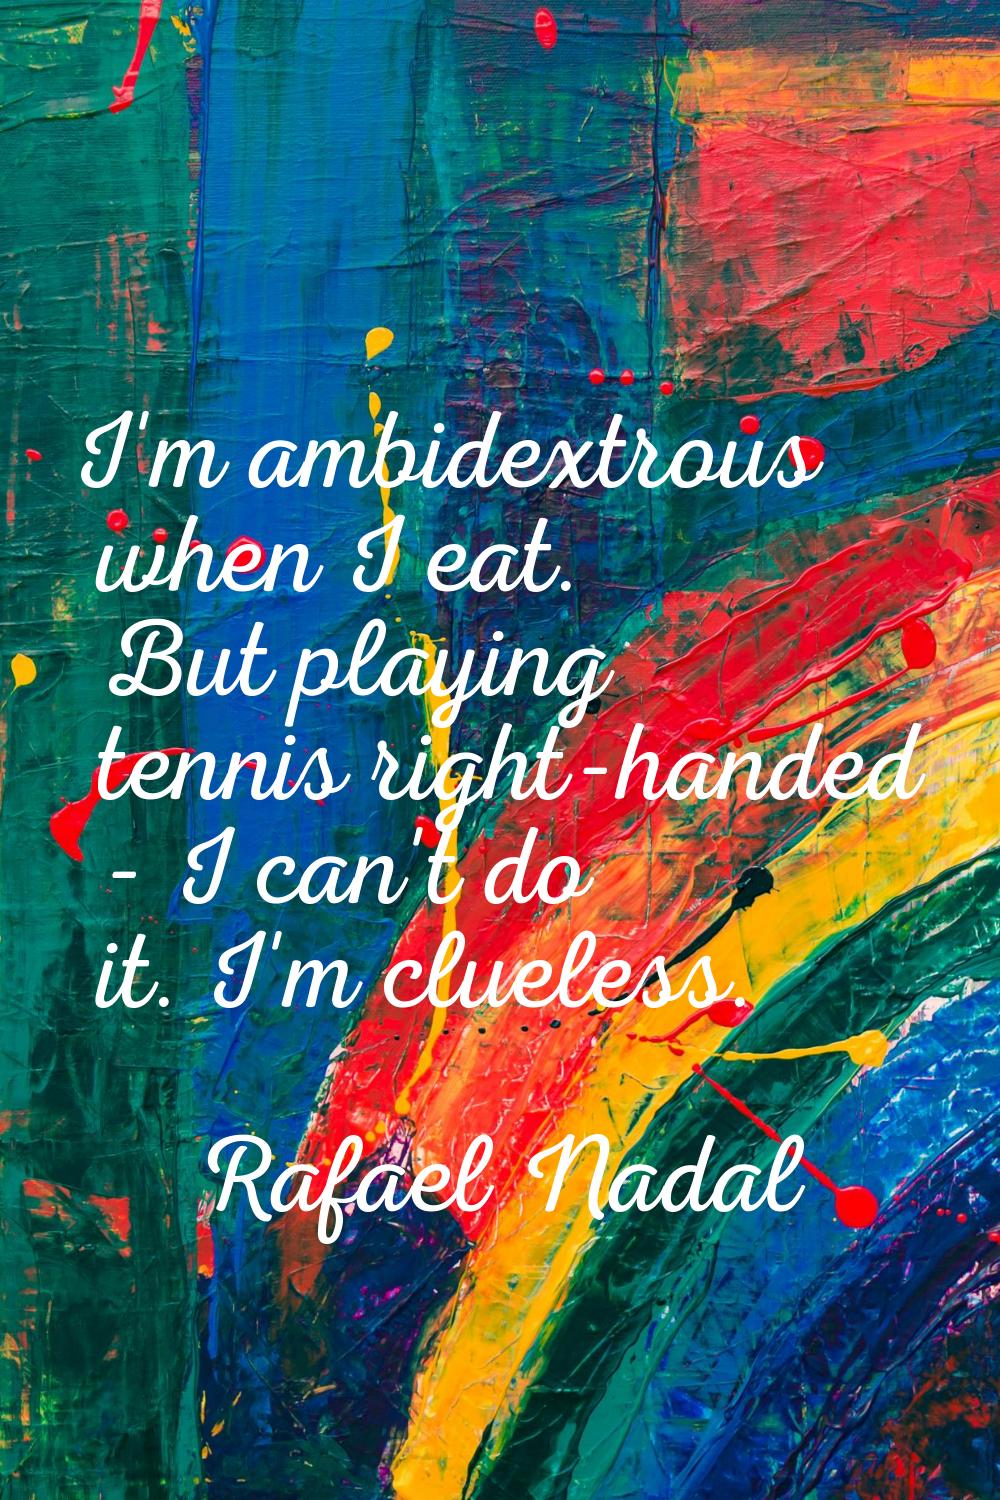 I'm ambidextrous when I eat. But playing tennis right-handed - I can't do it. I'm clueless.